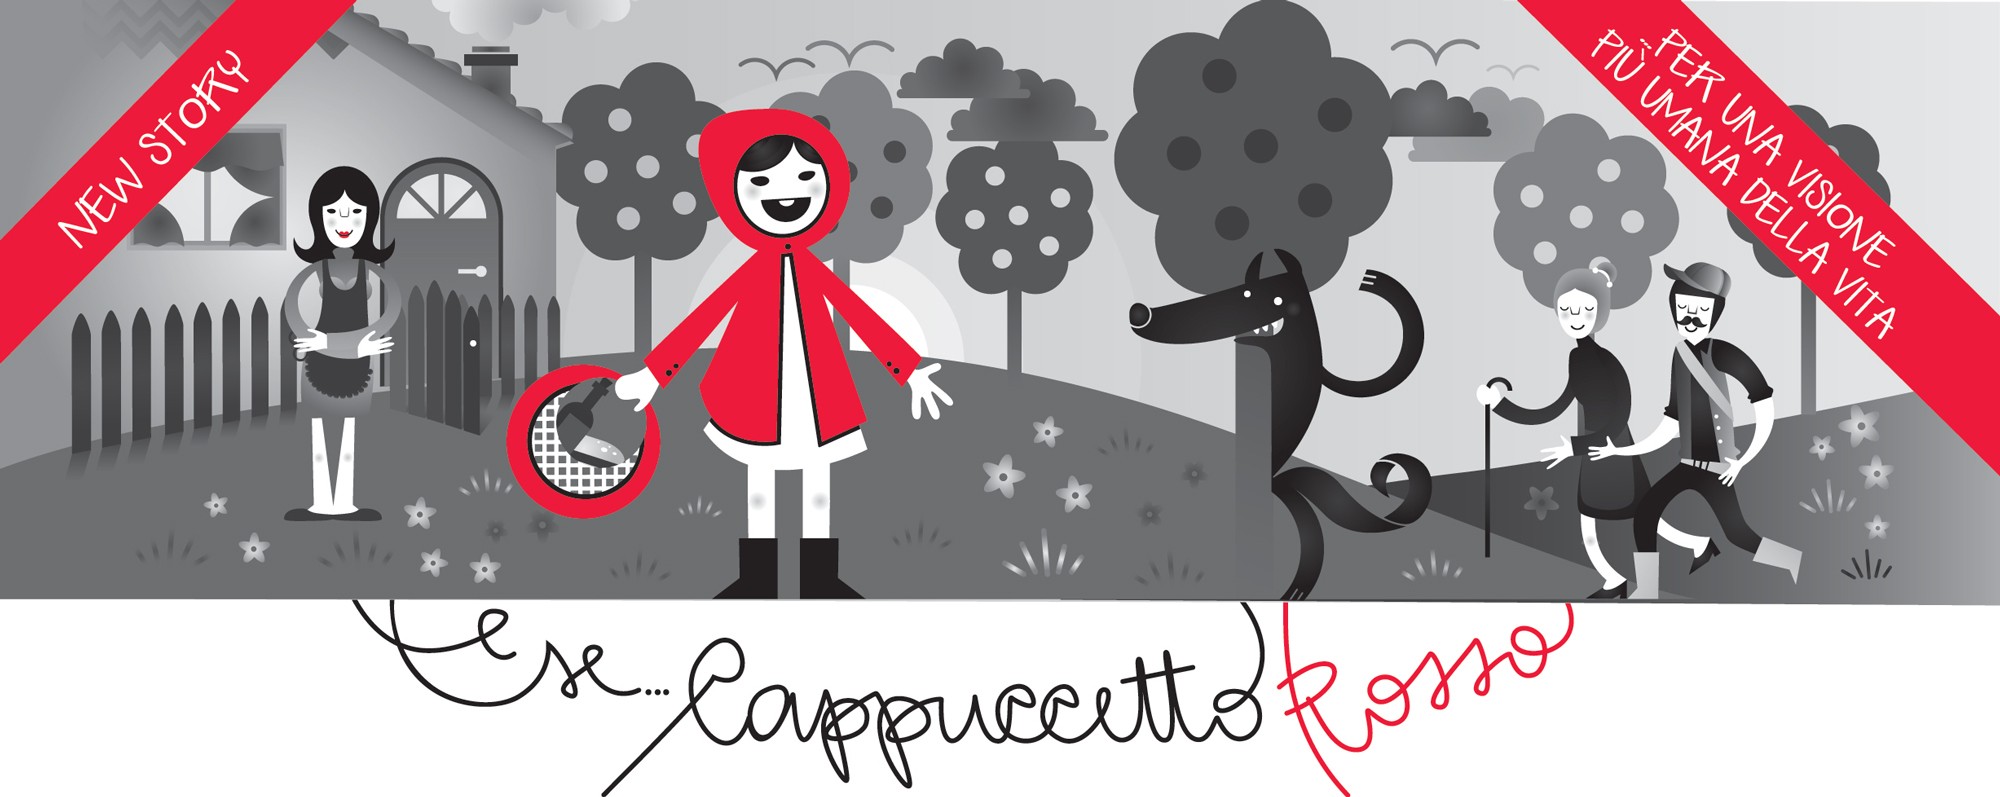 E se Cappuccetto Rosso – if Little Red Riding Hood